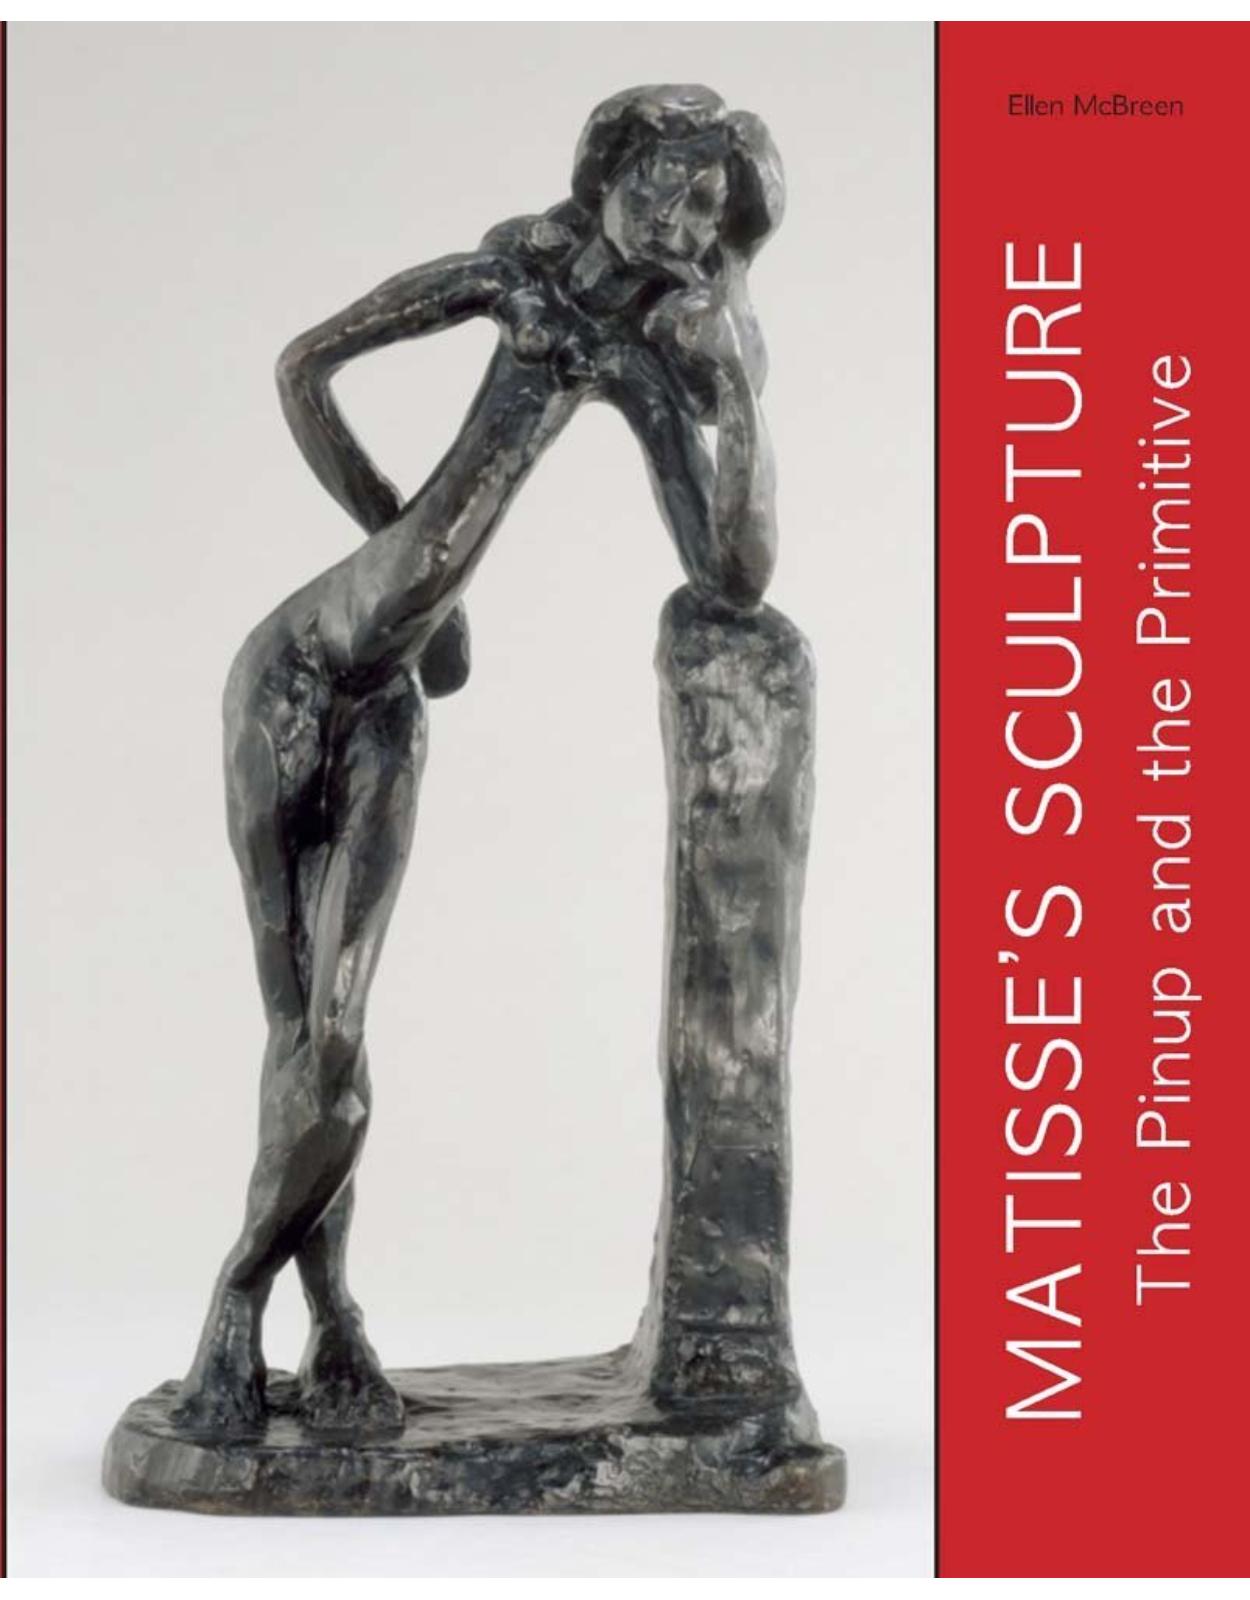 Matisse's Sculpture. The Pinup and the Primitive